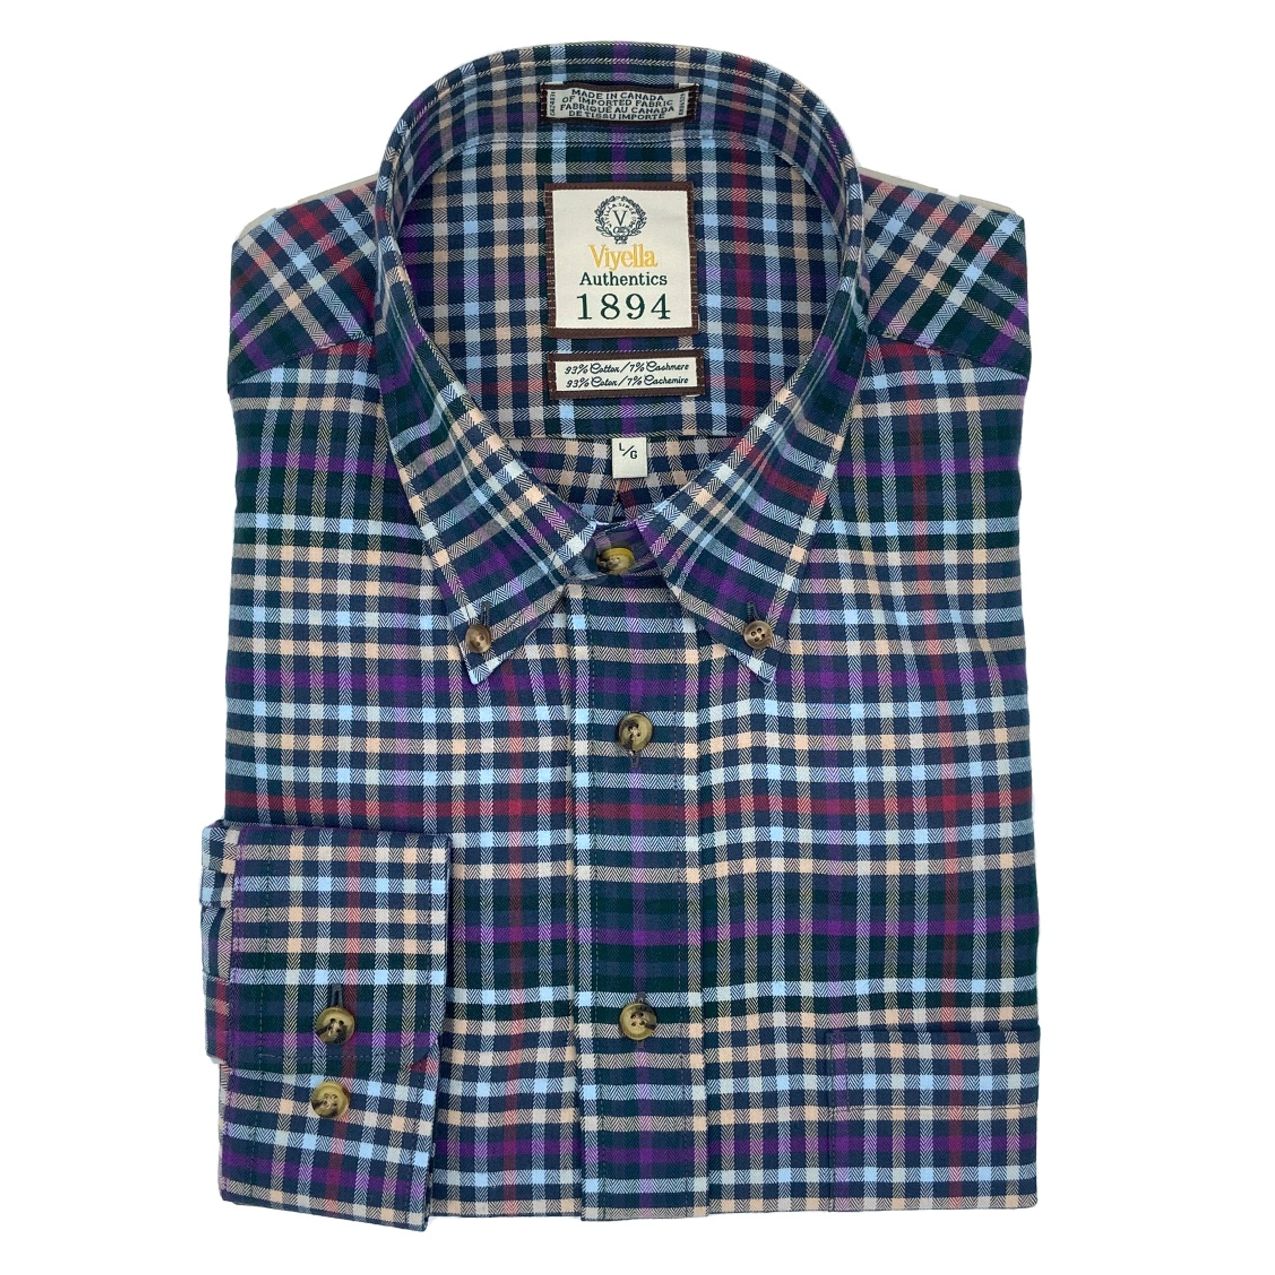 Navy and Purple Herringbone Plaid Cotton and Cashmere Blend '1894 Authentics' Button-Down Shirt by Viyella